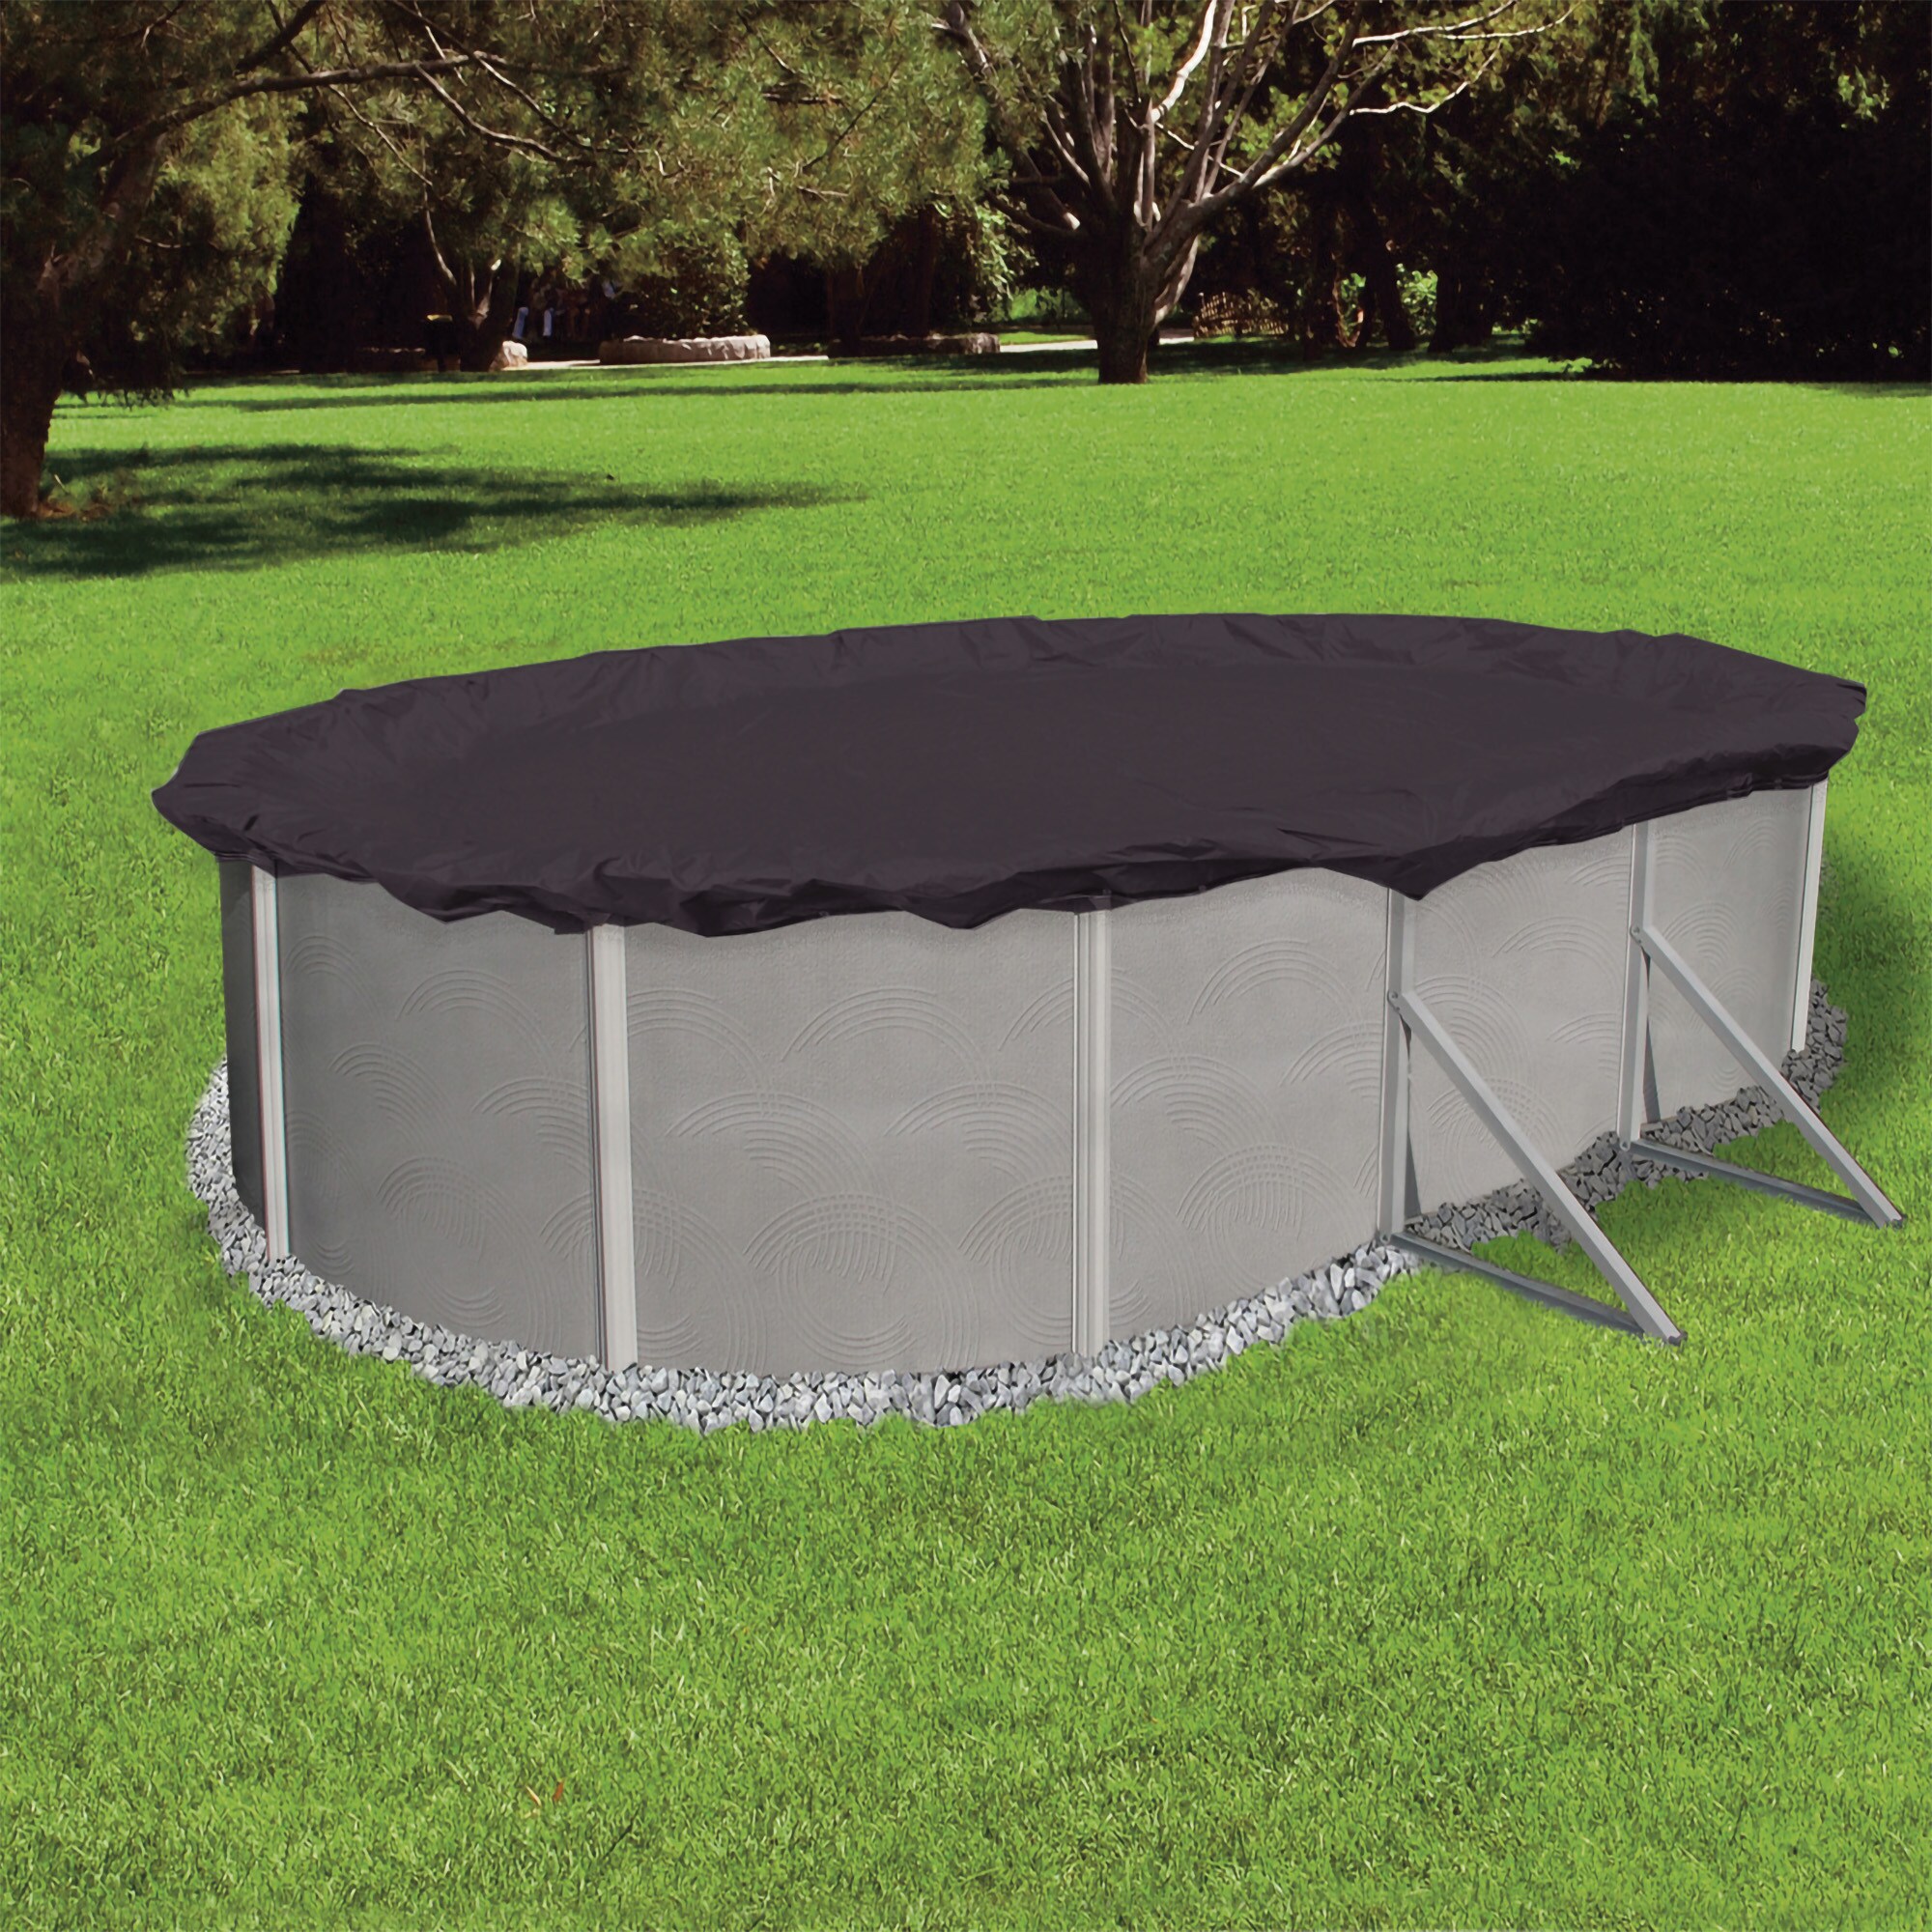 Oval Pool Covers at